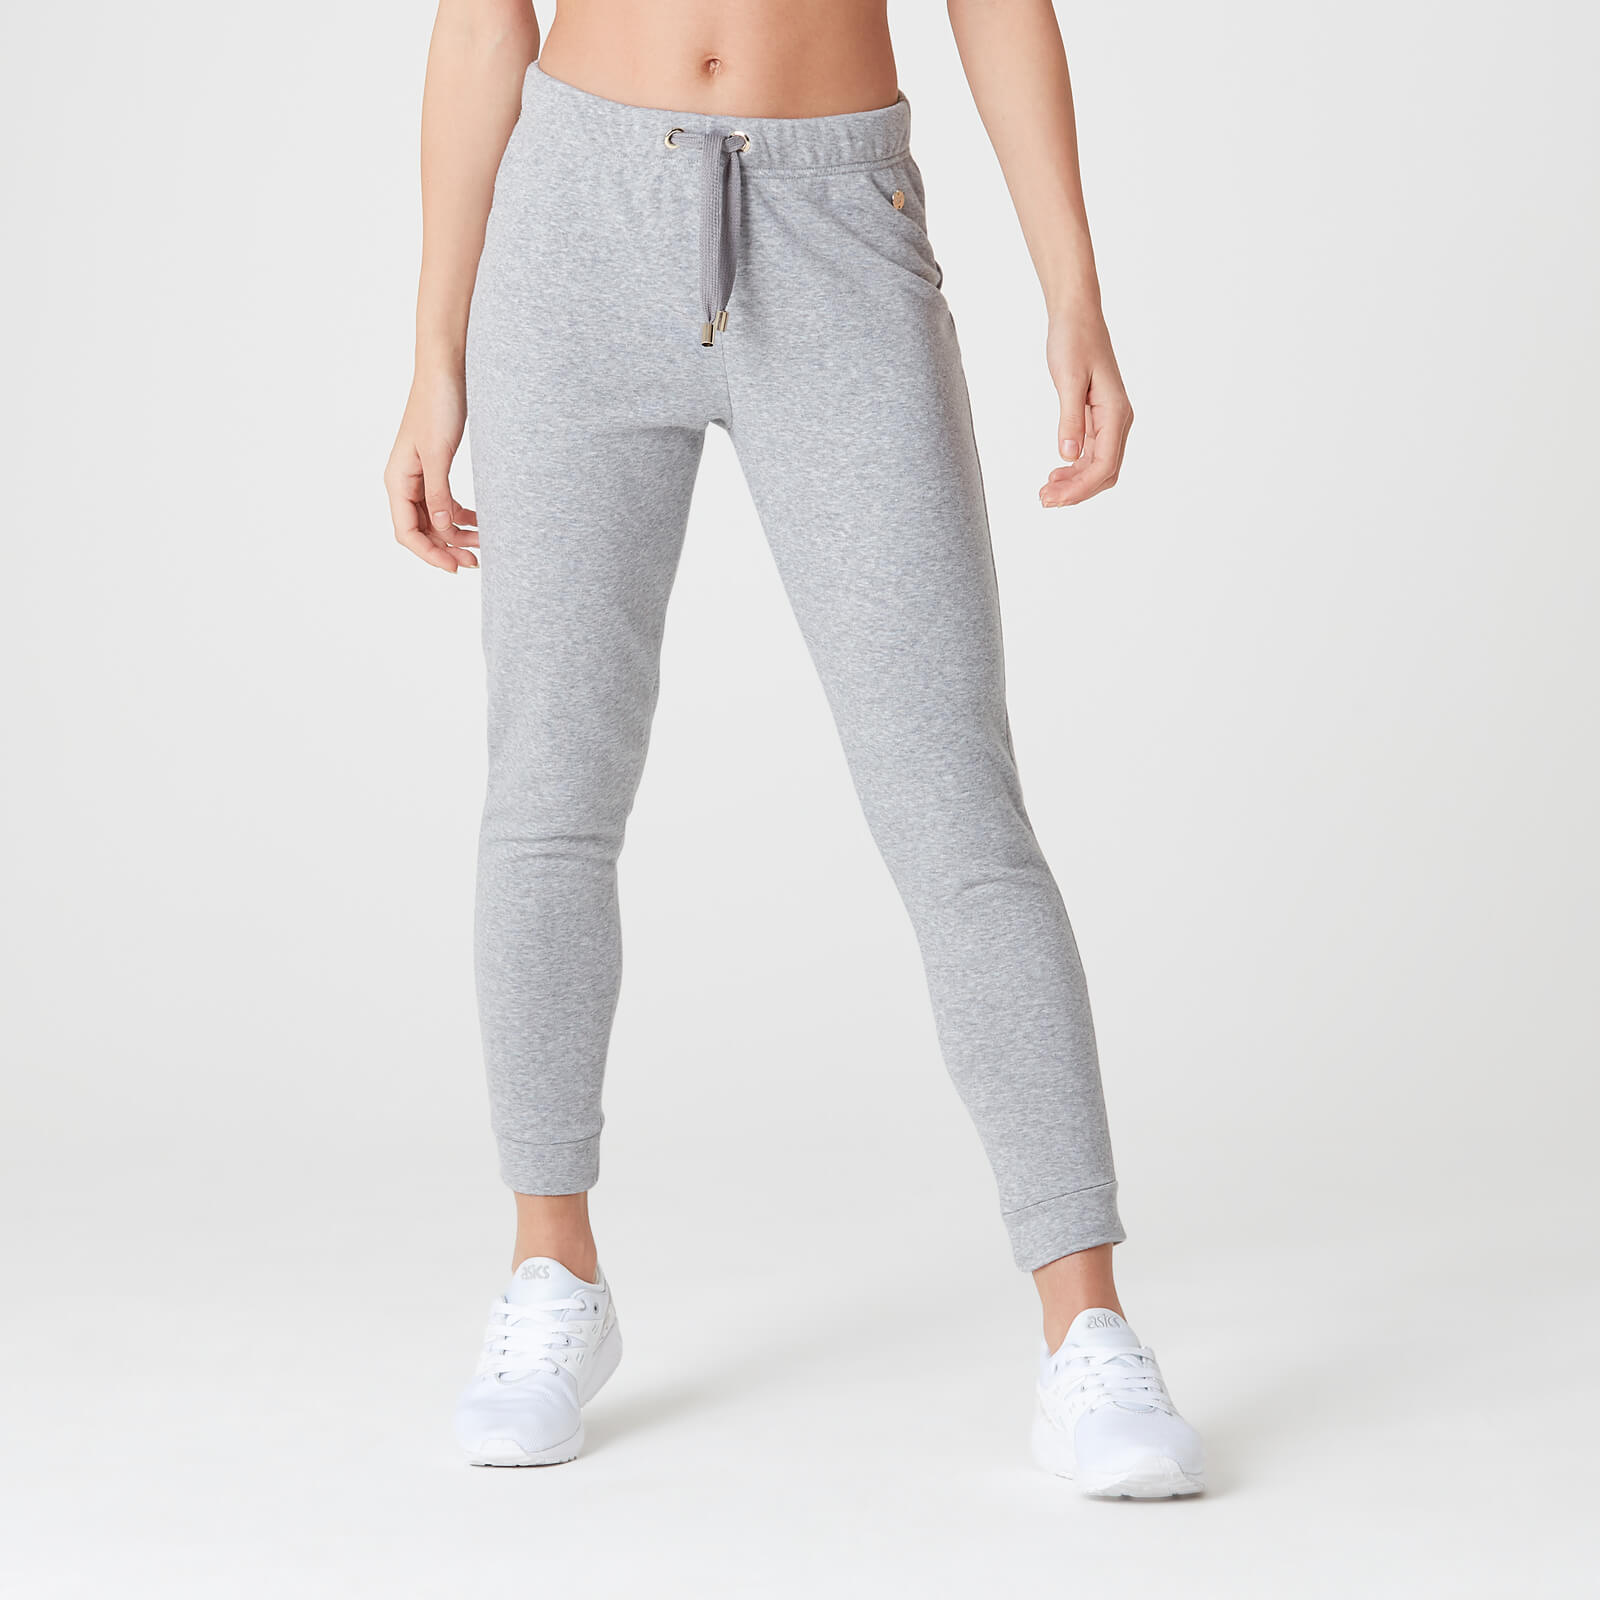 Myprotein Luxe Lounge Jogger - Grey Marl - XS